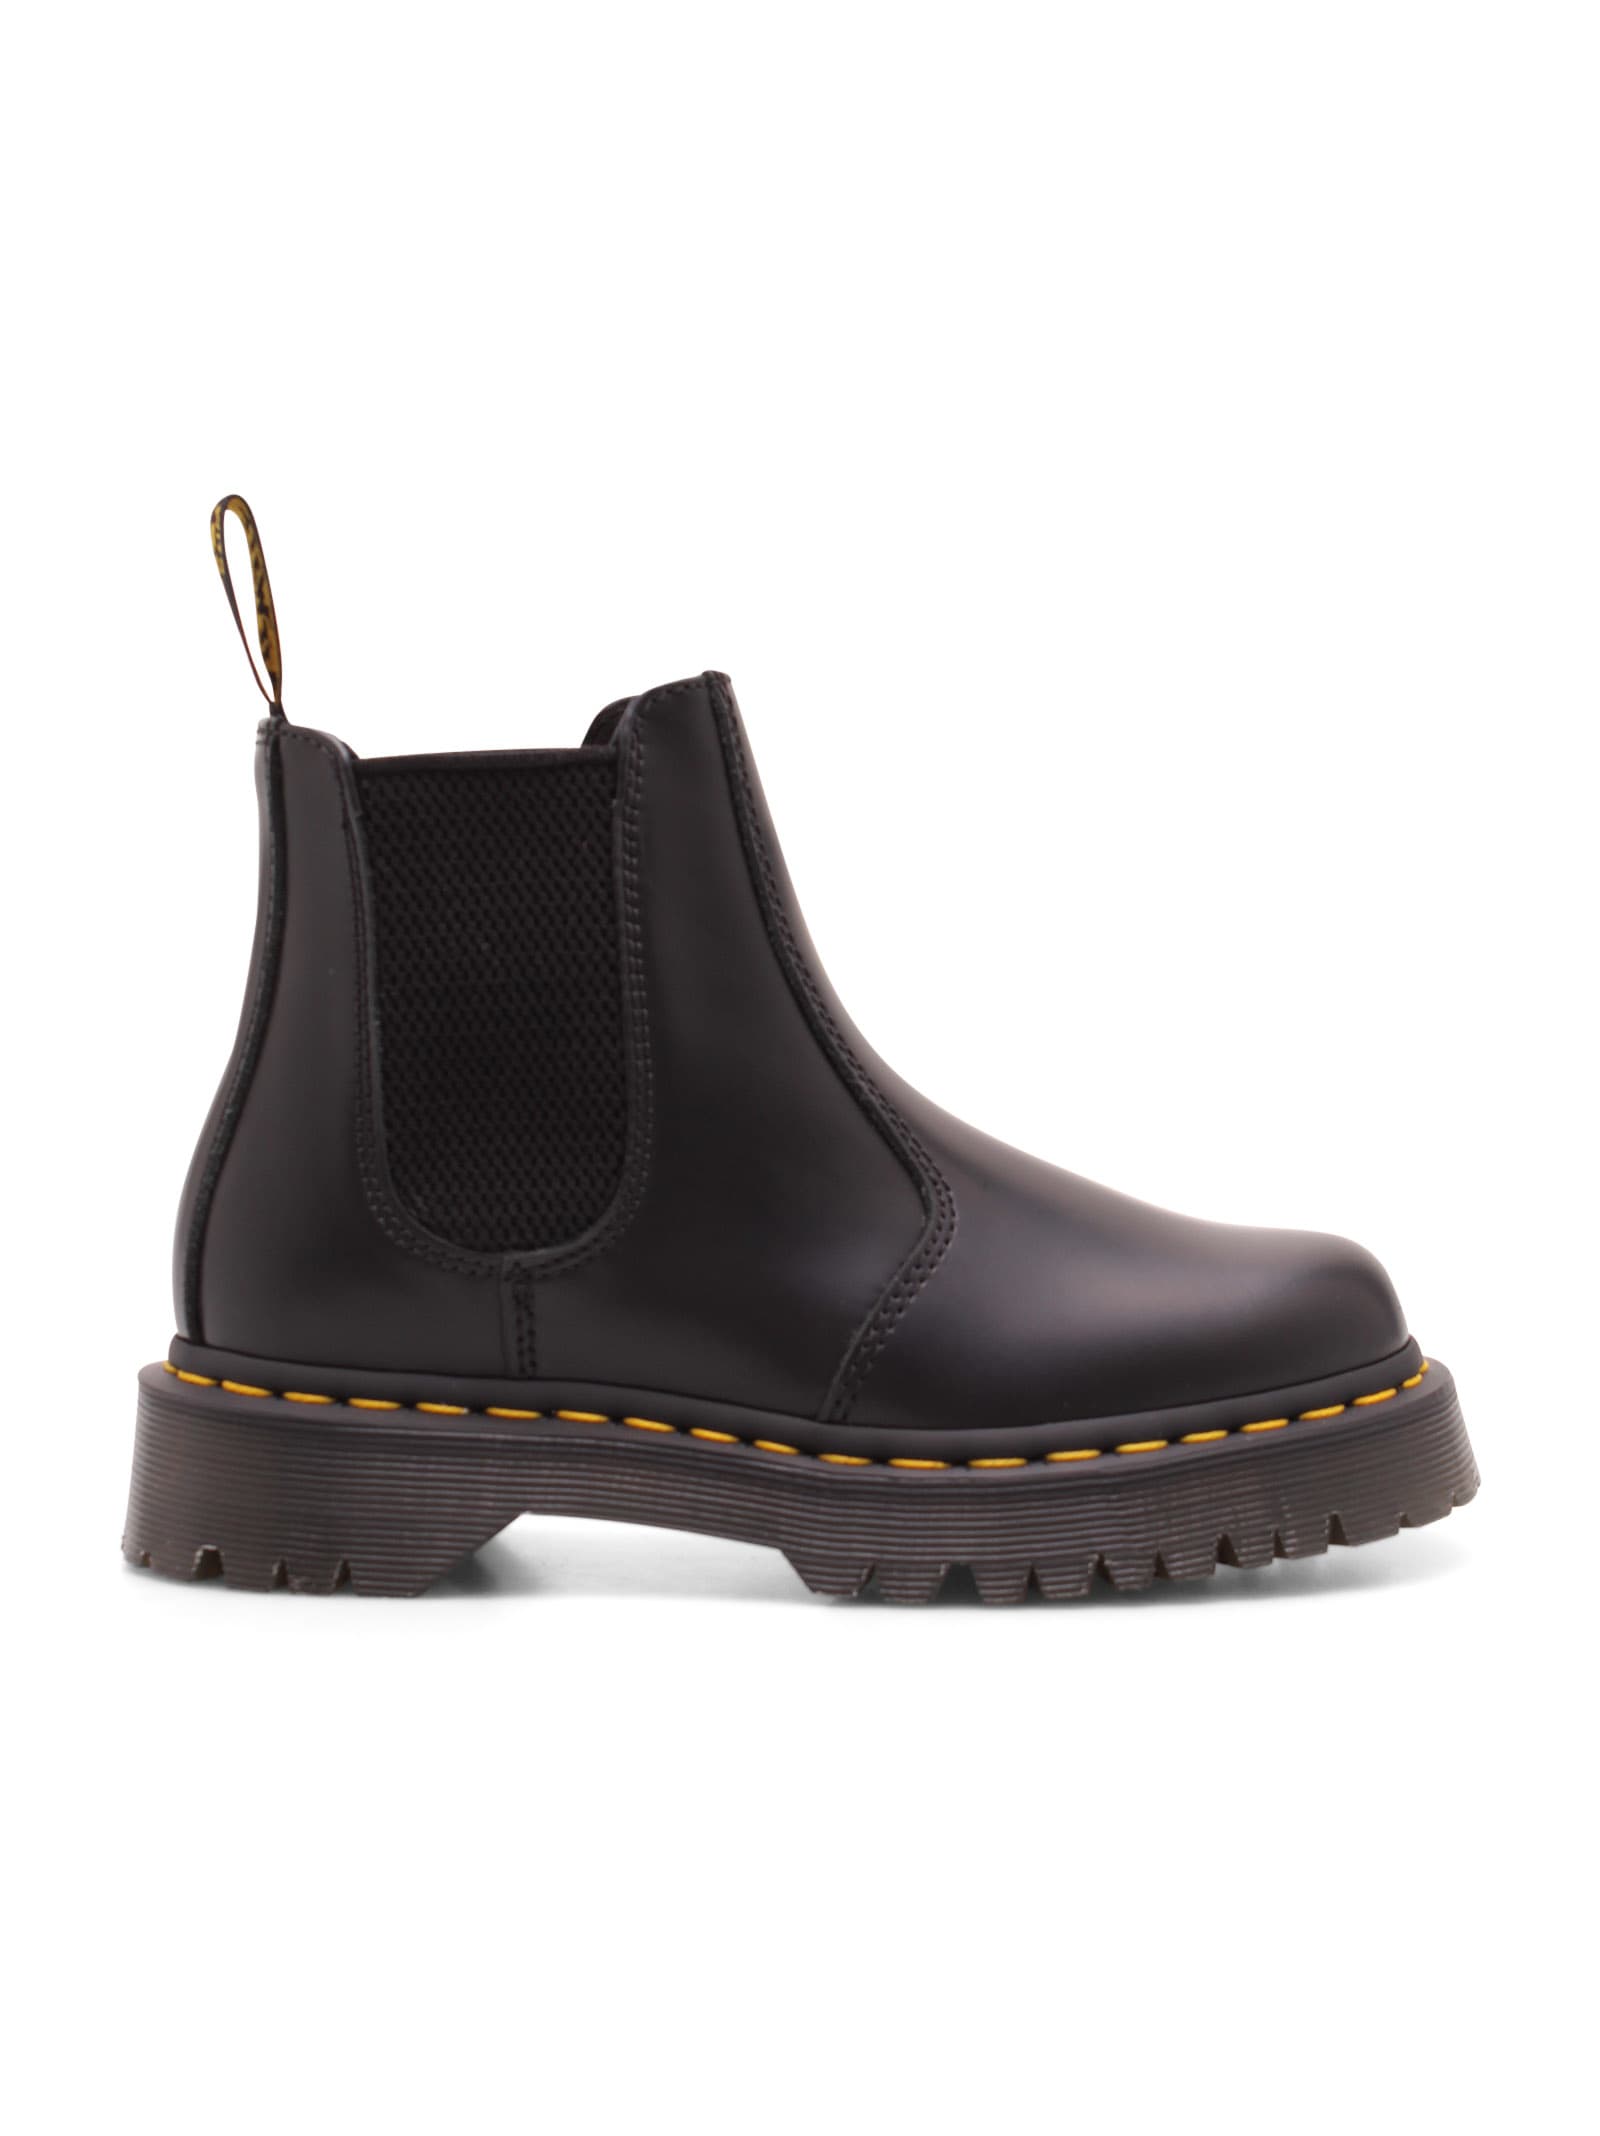 Dr. Martens 2976 Bex Leather Ankle Boots